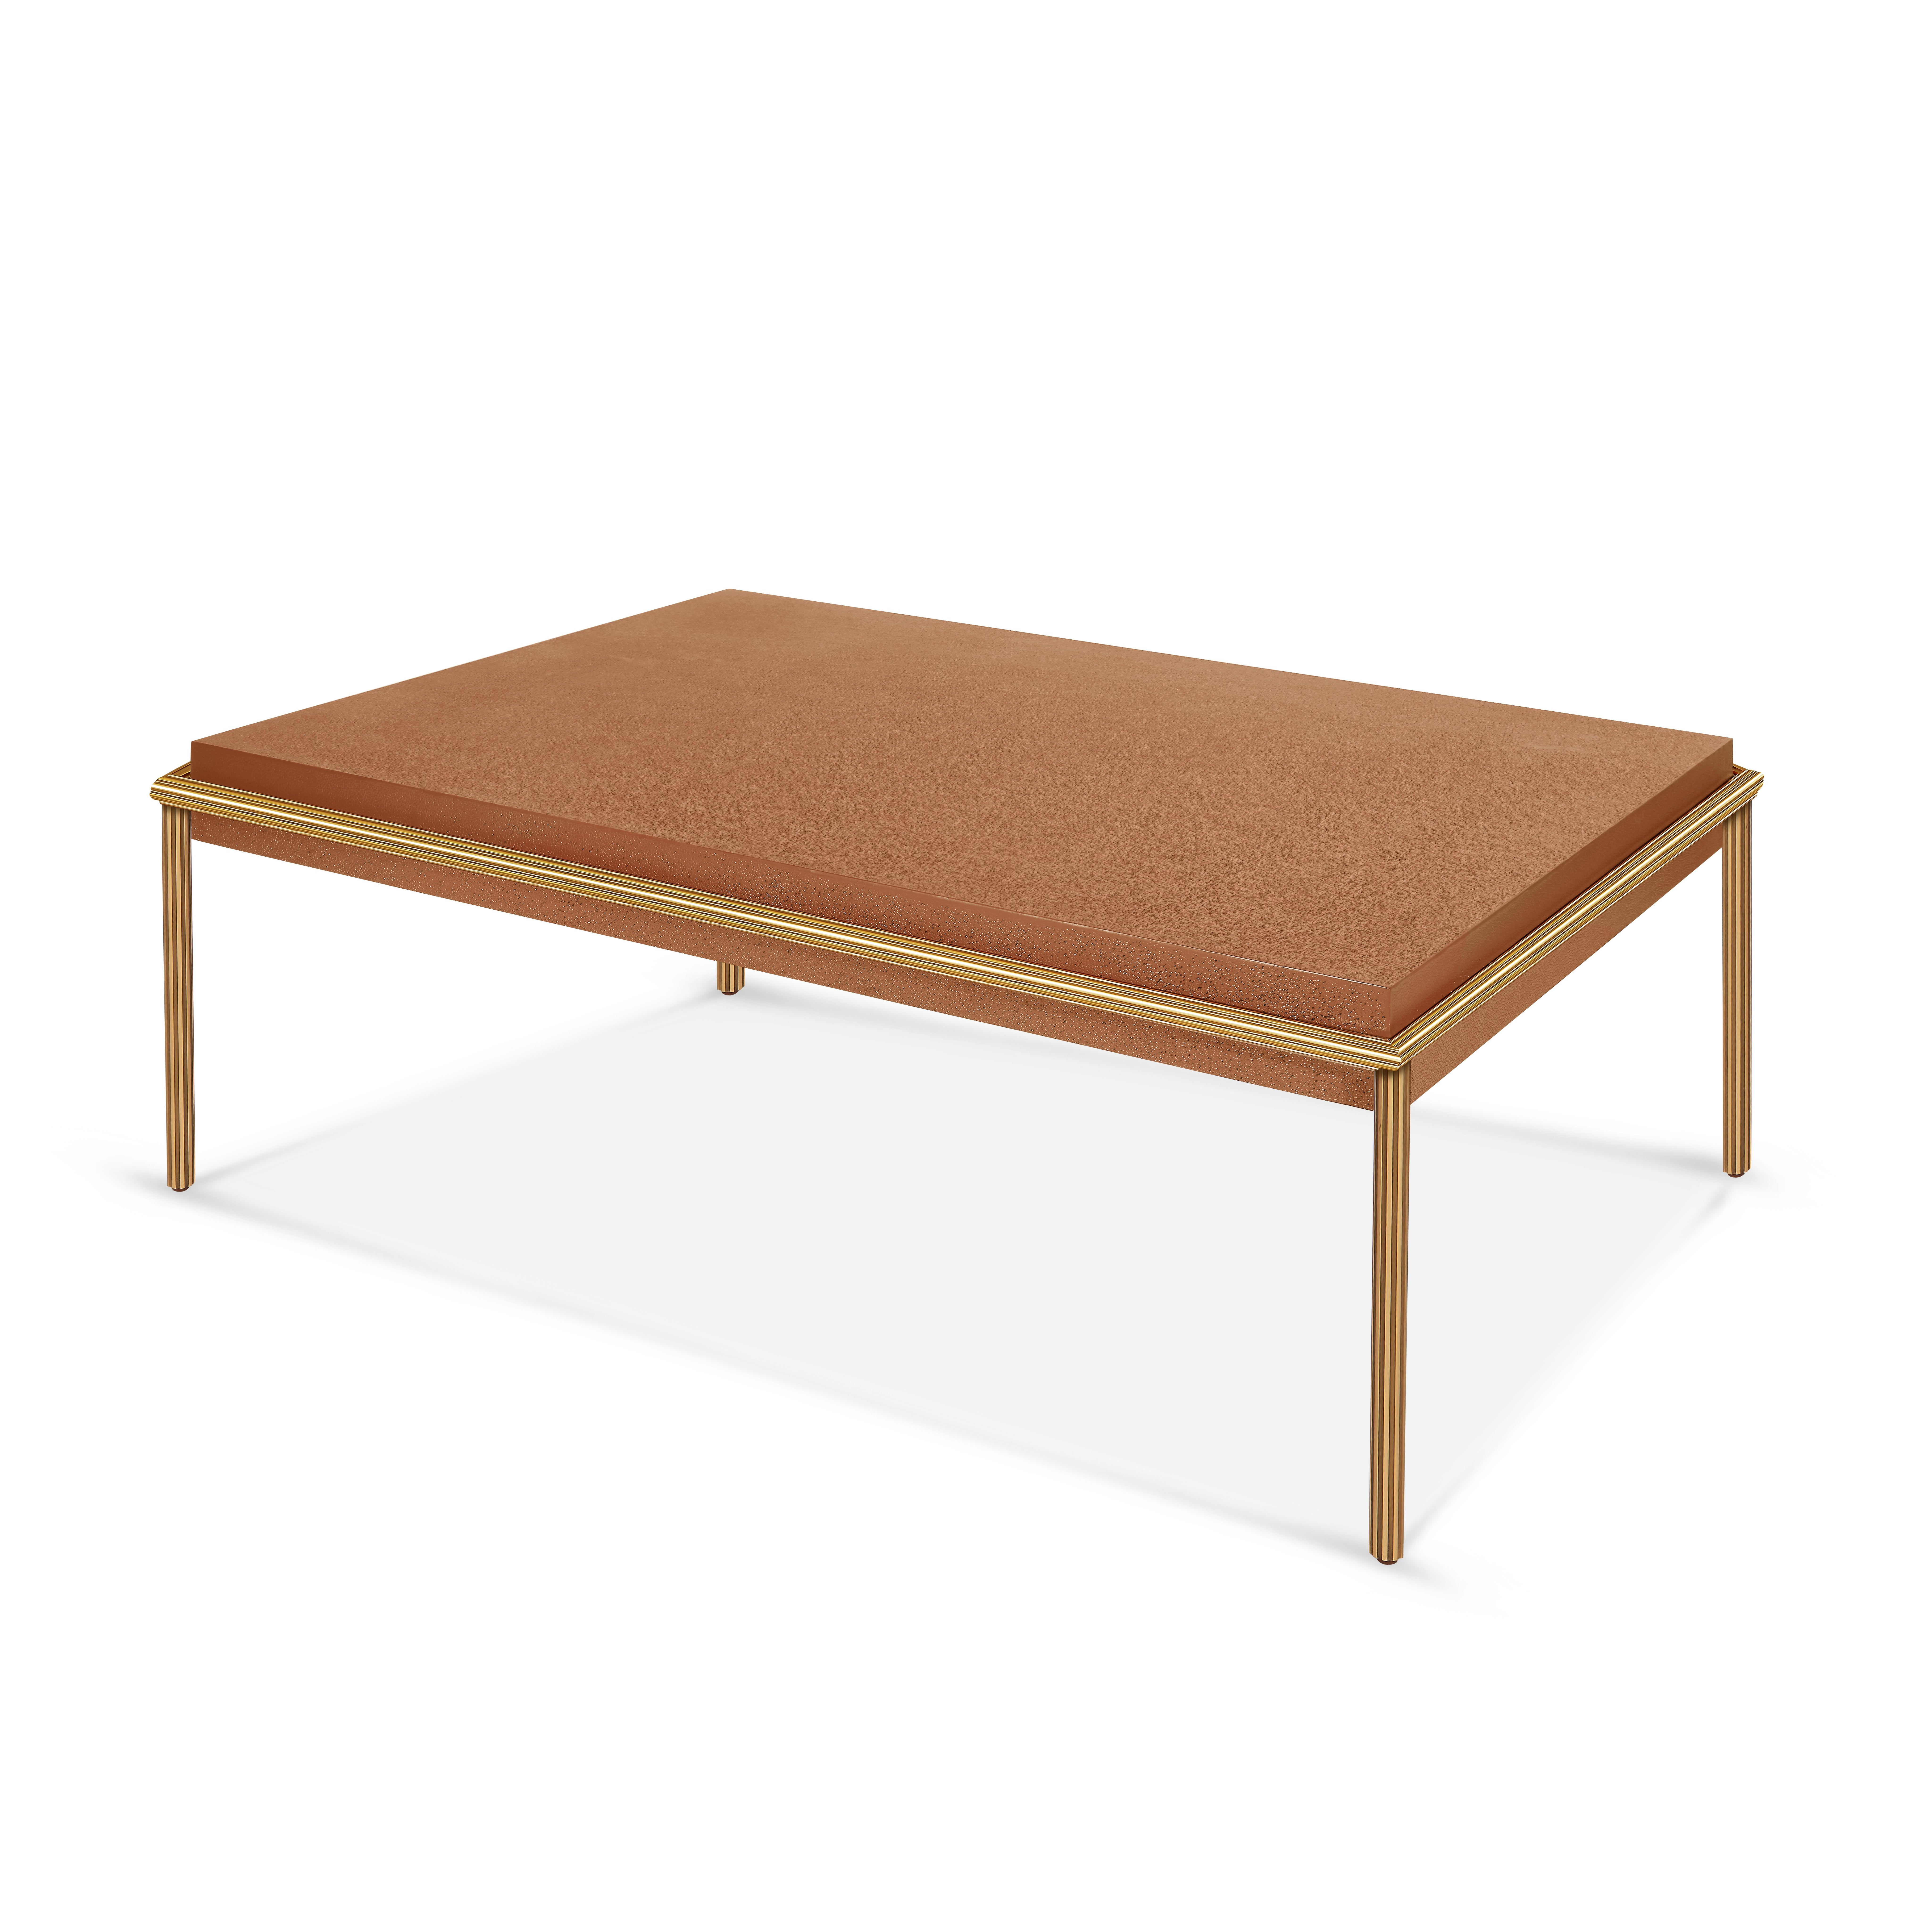 Minimal shapes are always pleasing and easy to place in a room, but they need special details to keep the visual interest up. Our Zola coffee table features a bonded leather wrapped top (available in red and brown) supported by a brass frame with a